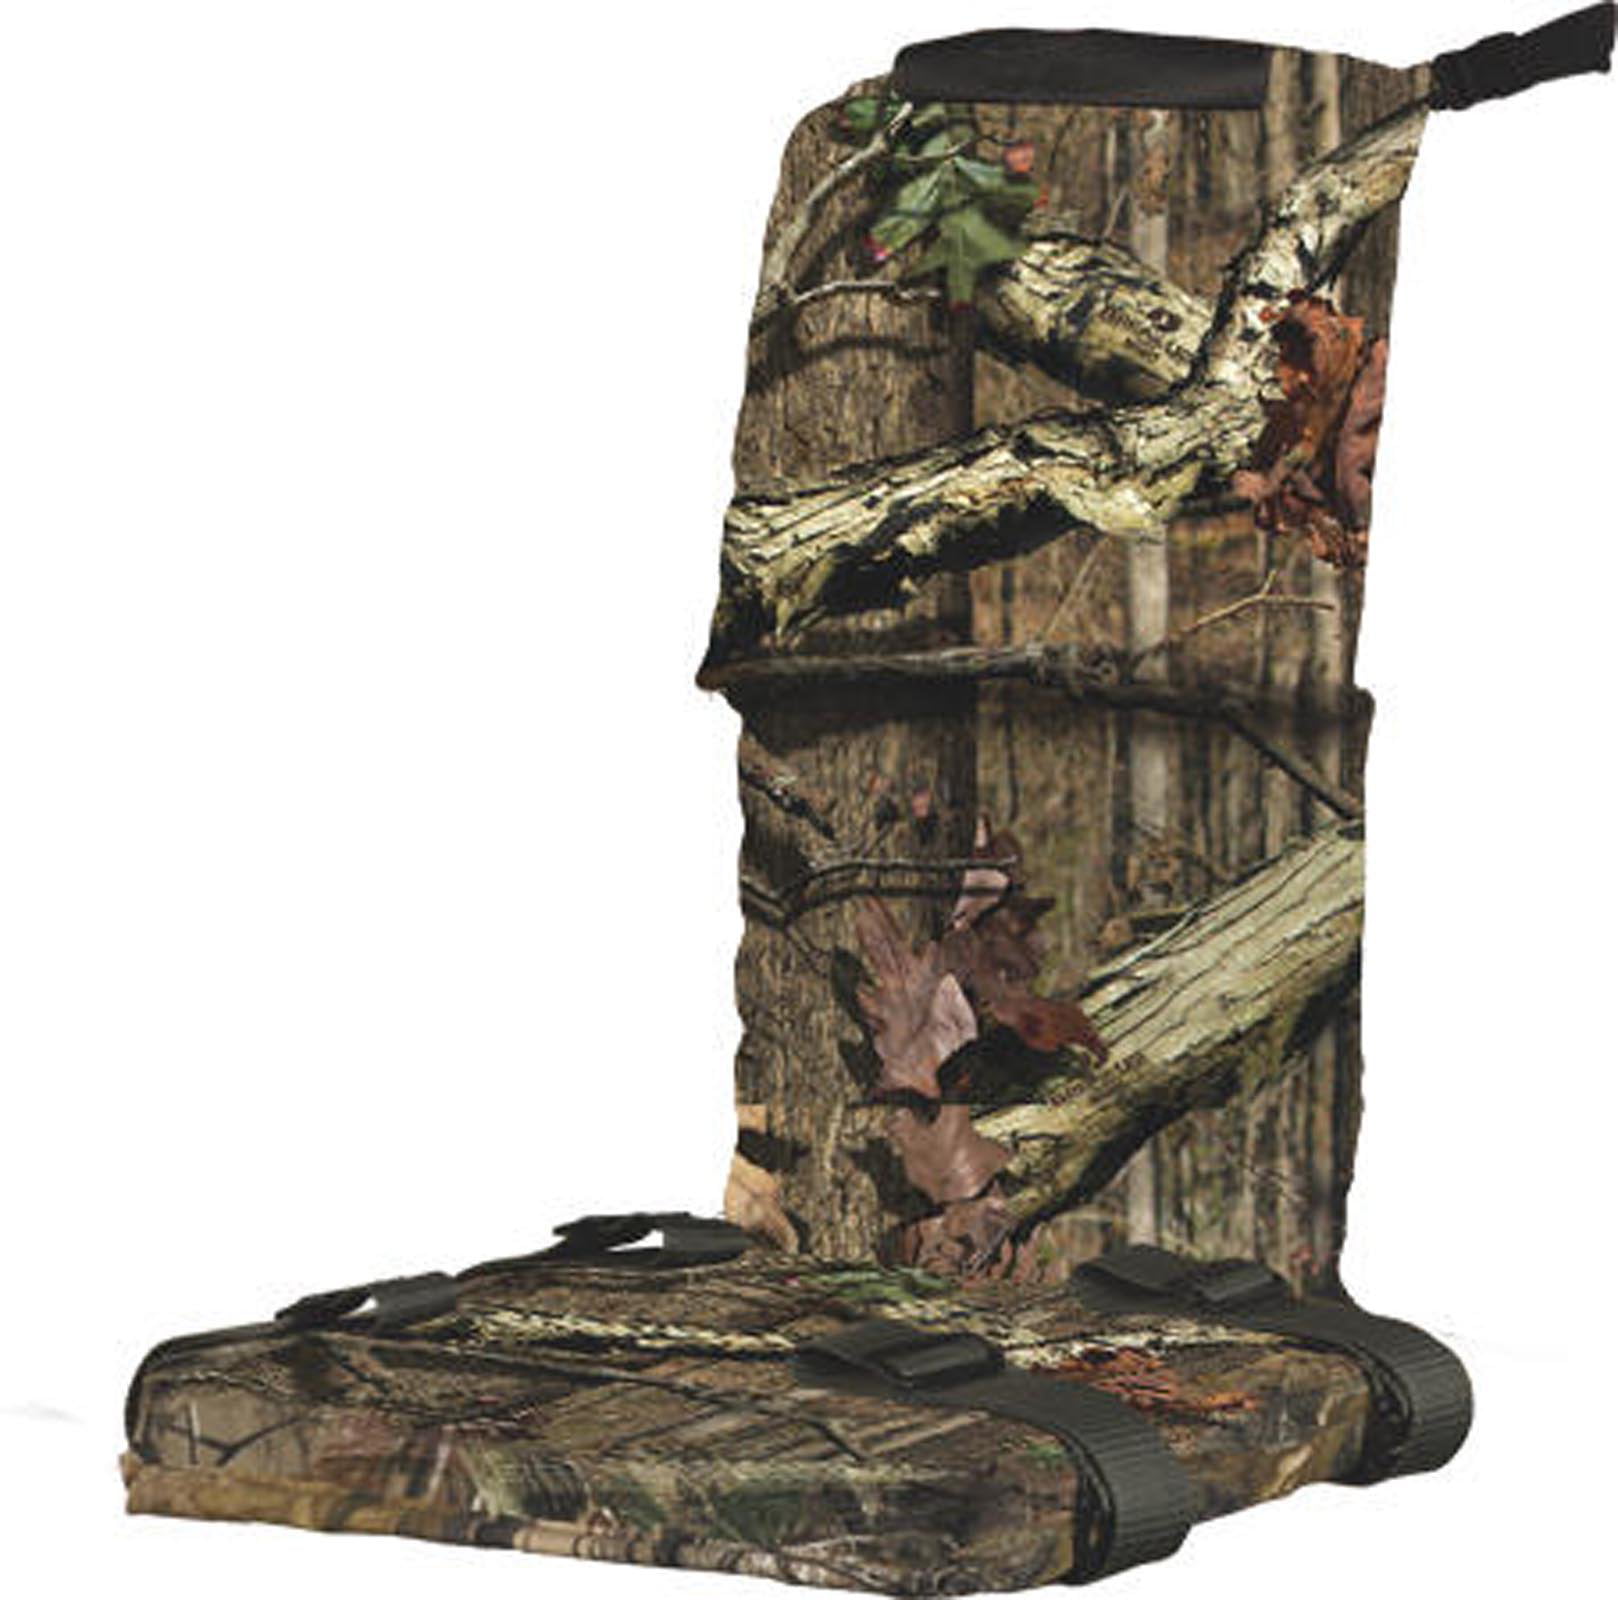 Summit 85250 Tree Seat 2 Pack for sale online 